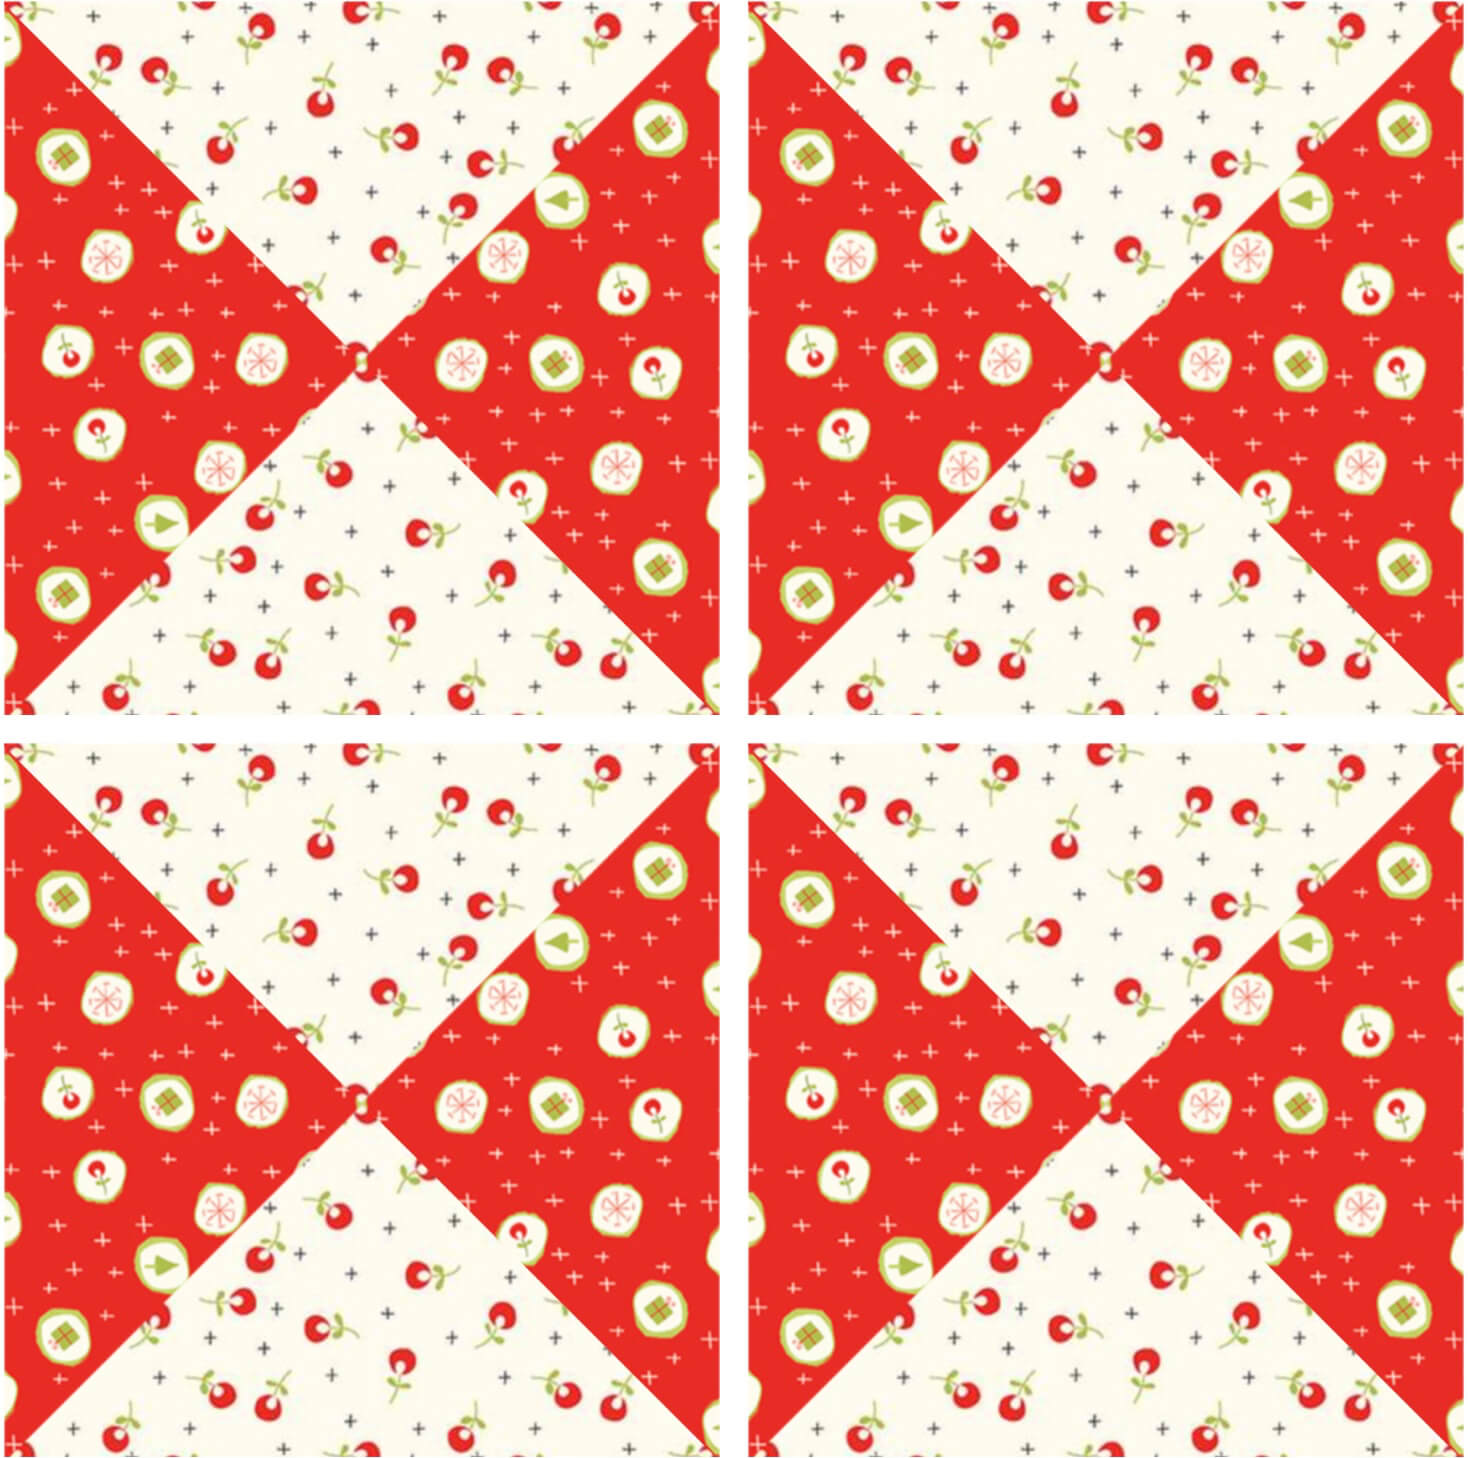 August 2021 NZP Block Of The Month Combination Star Quilt Block